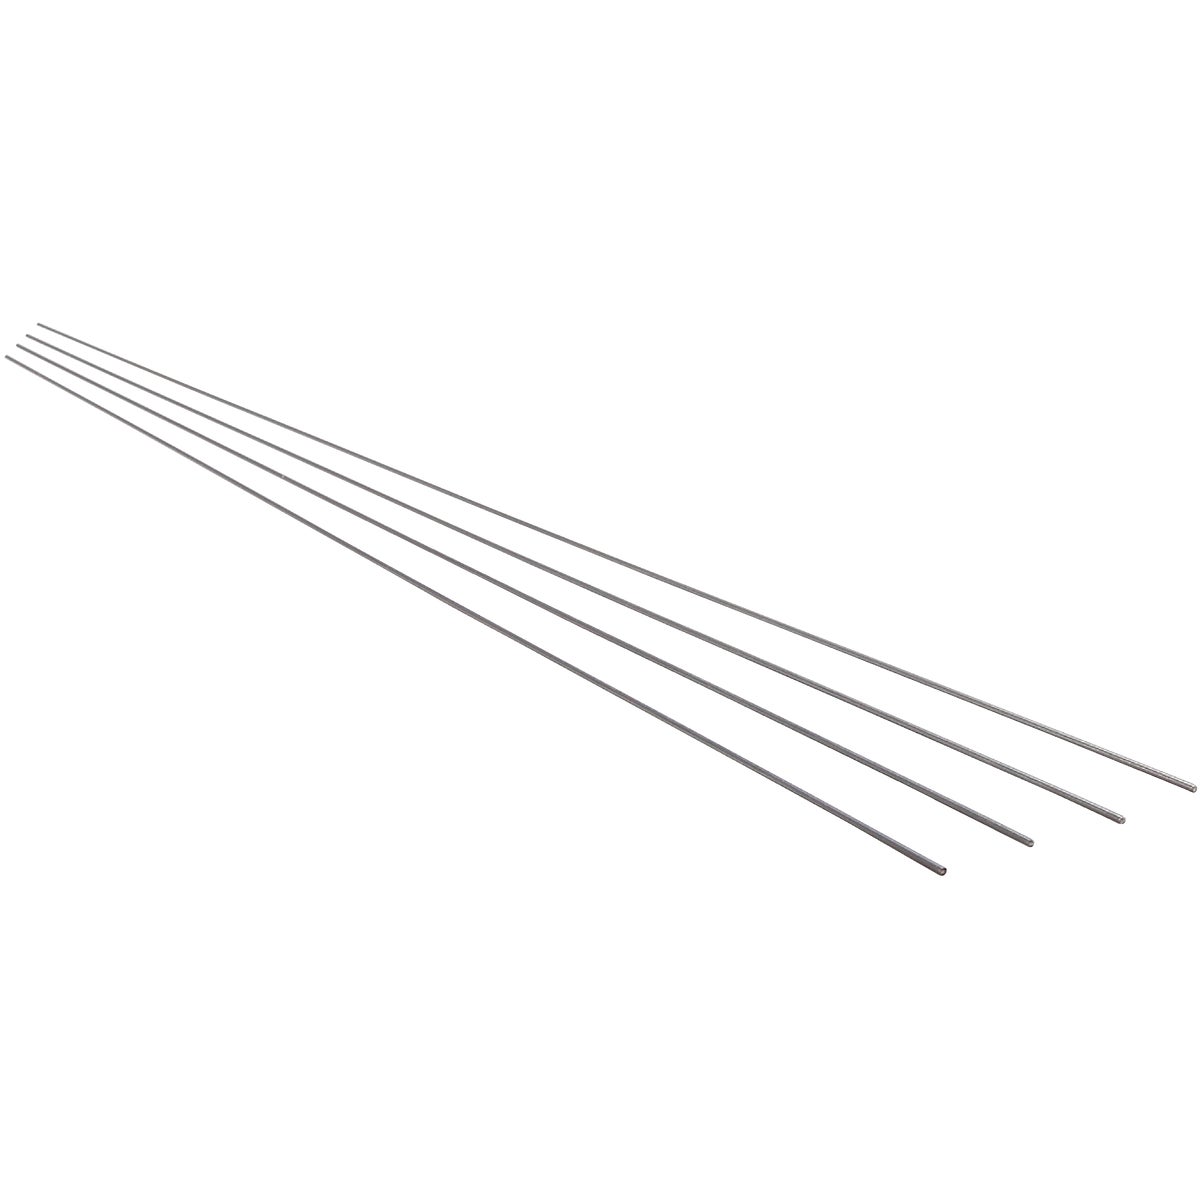 K&S 504 K&S .062 In. x 36 In. Steel Music Wire (3-Count) 504